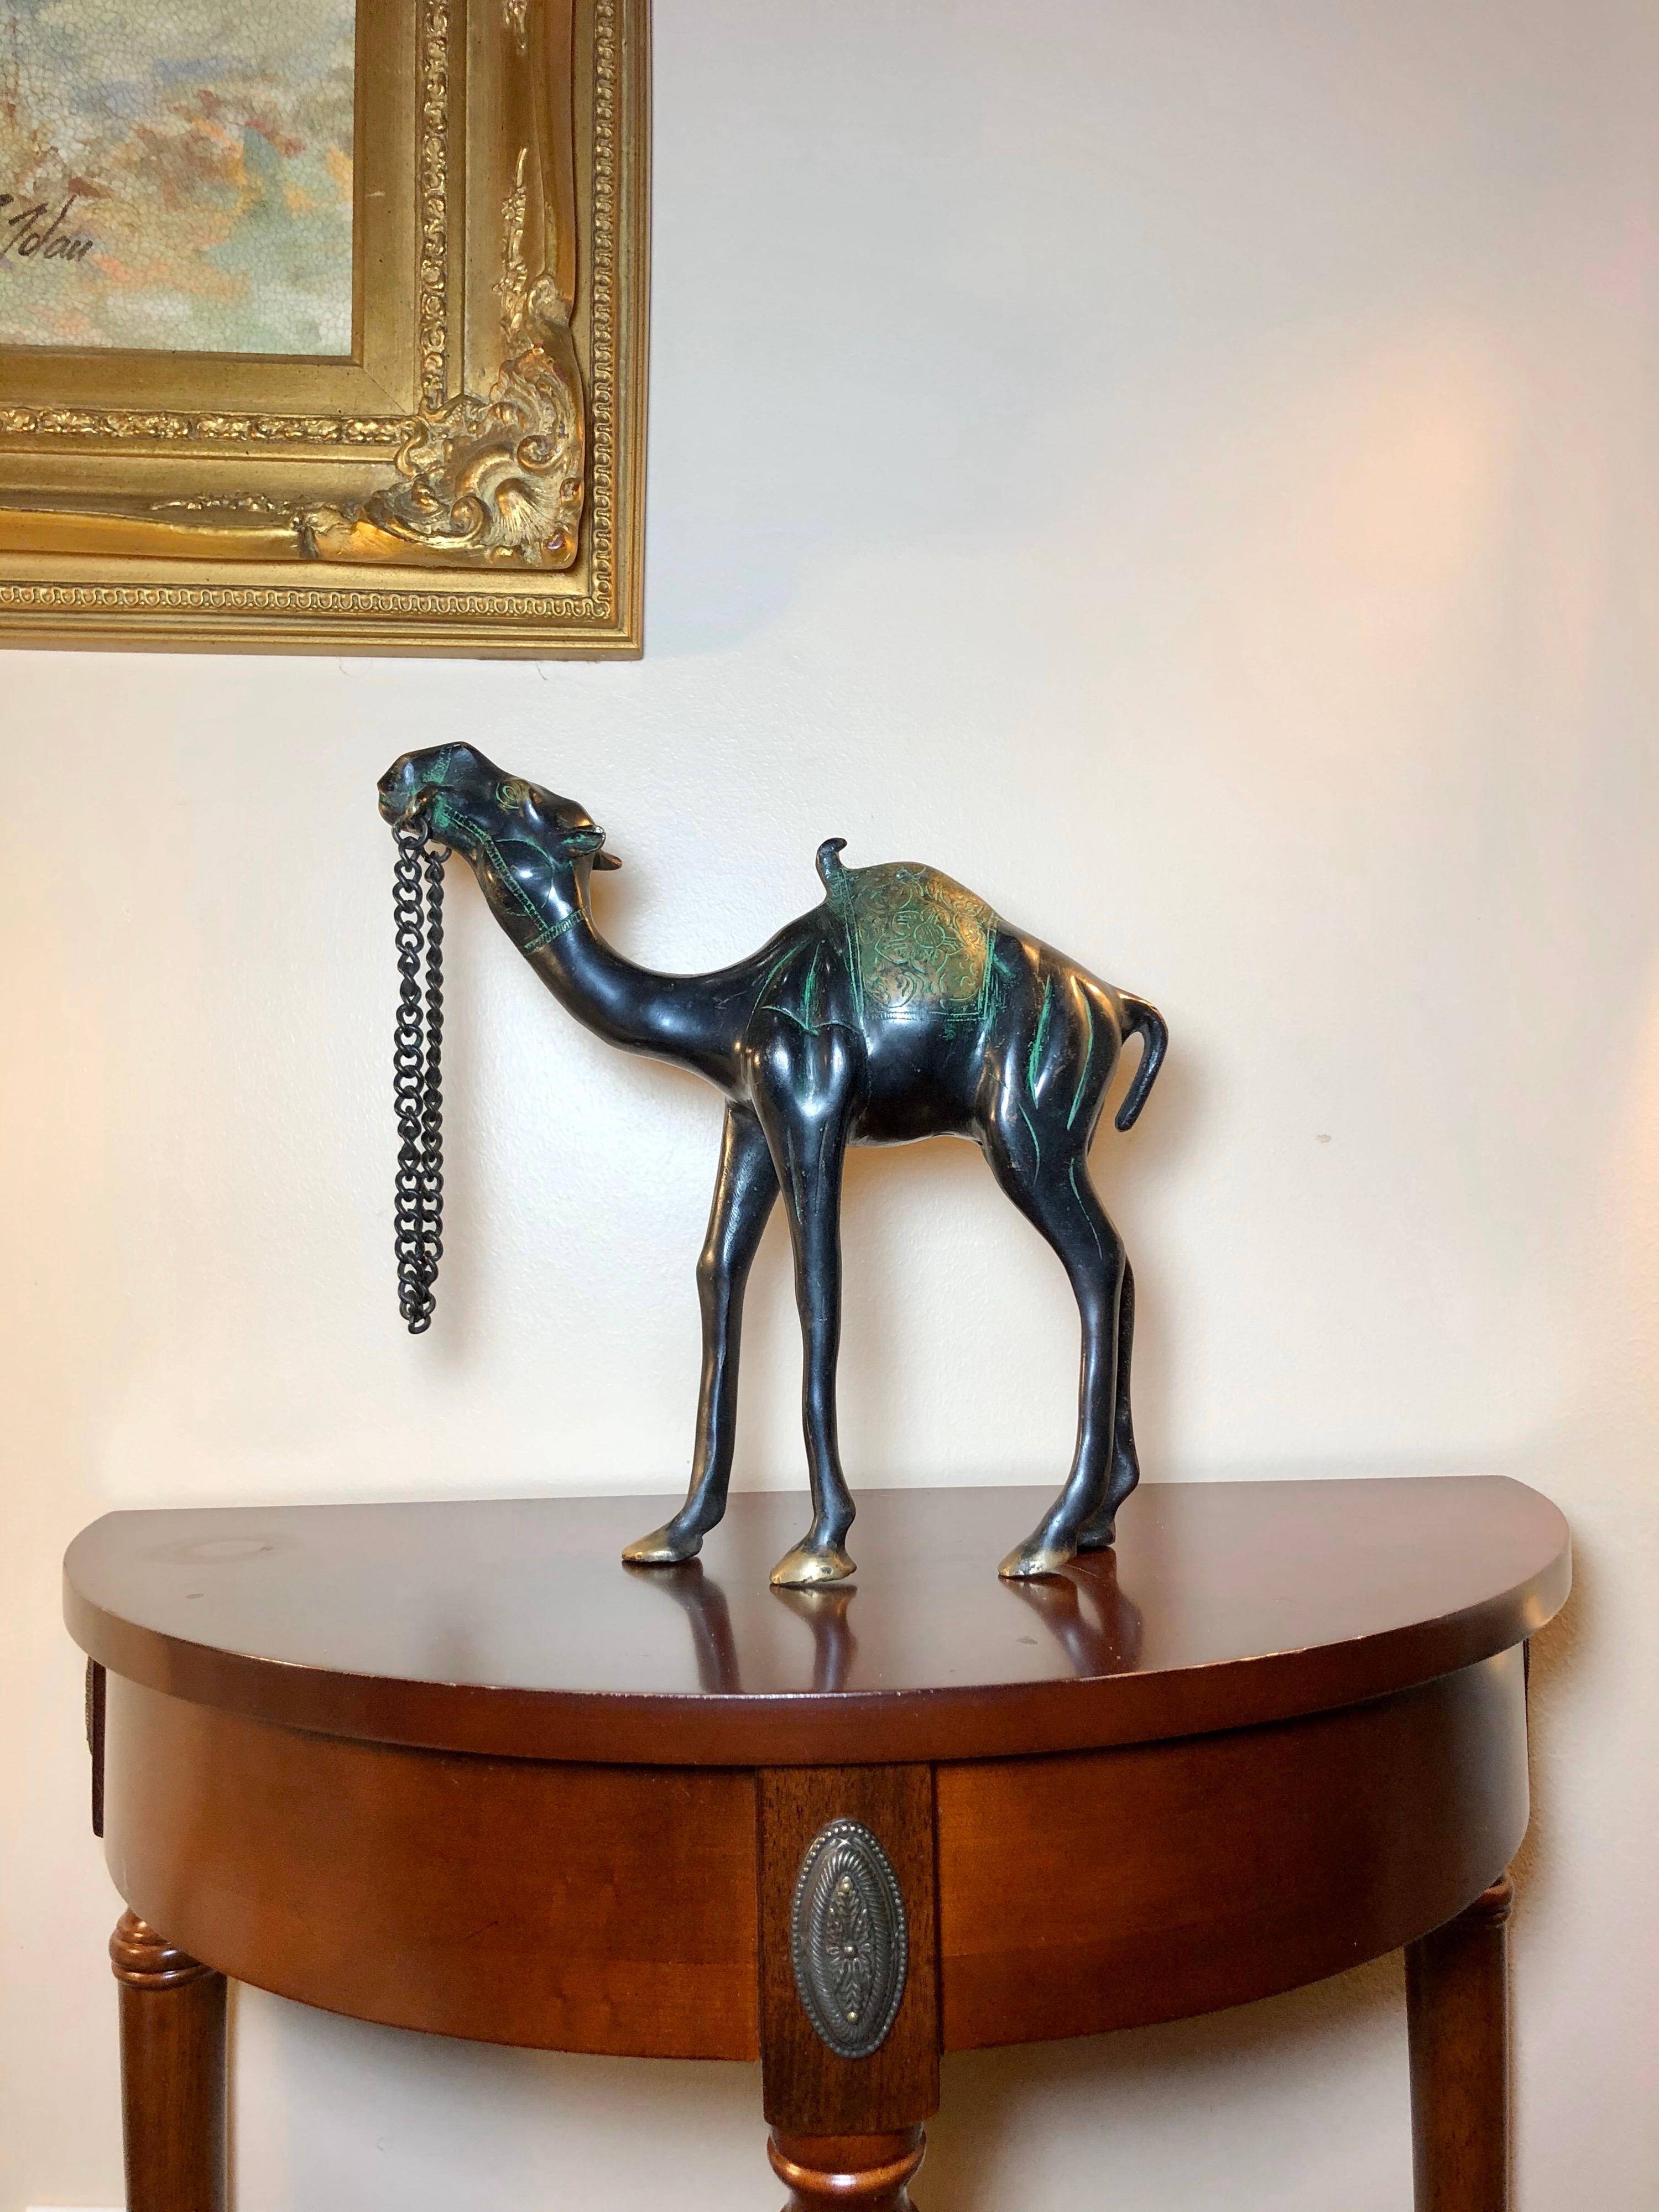 Stunning antique bronze sculpture of a camel saddled up and ready to cross the Sahara Desert. Ornately detailed, with the saddle and musculature handsomely defined by engraving and polishing. The natural green patina adds further beauty and